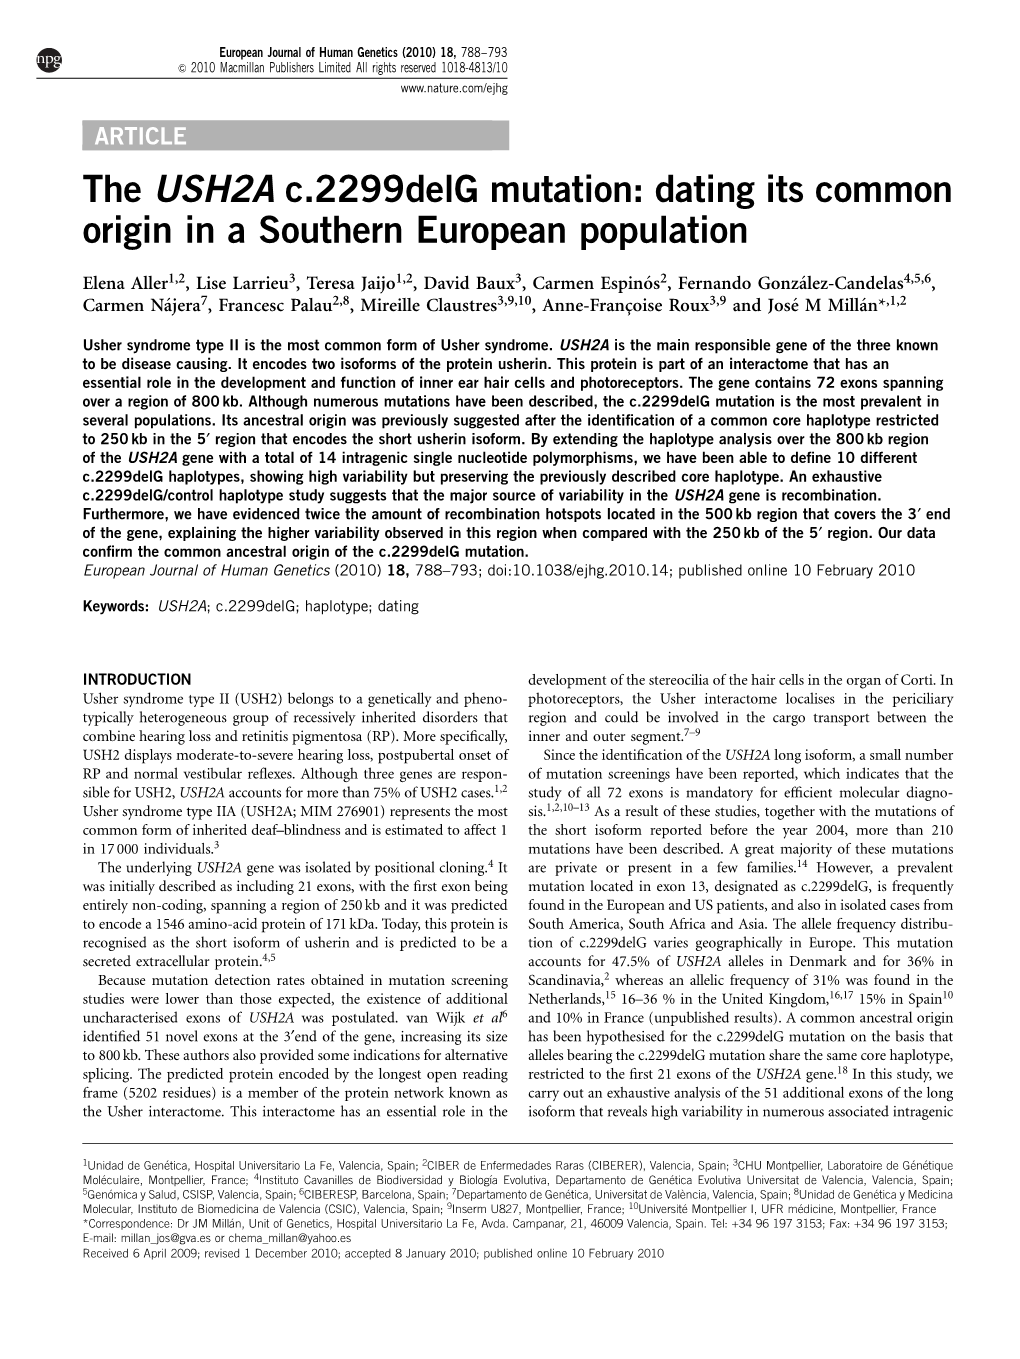 The USH2A C.2299Delg Mutation: Dating Its Common Origin in a Southern European Population